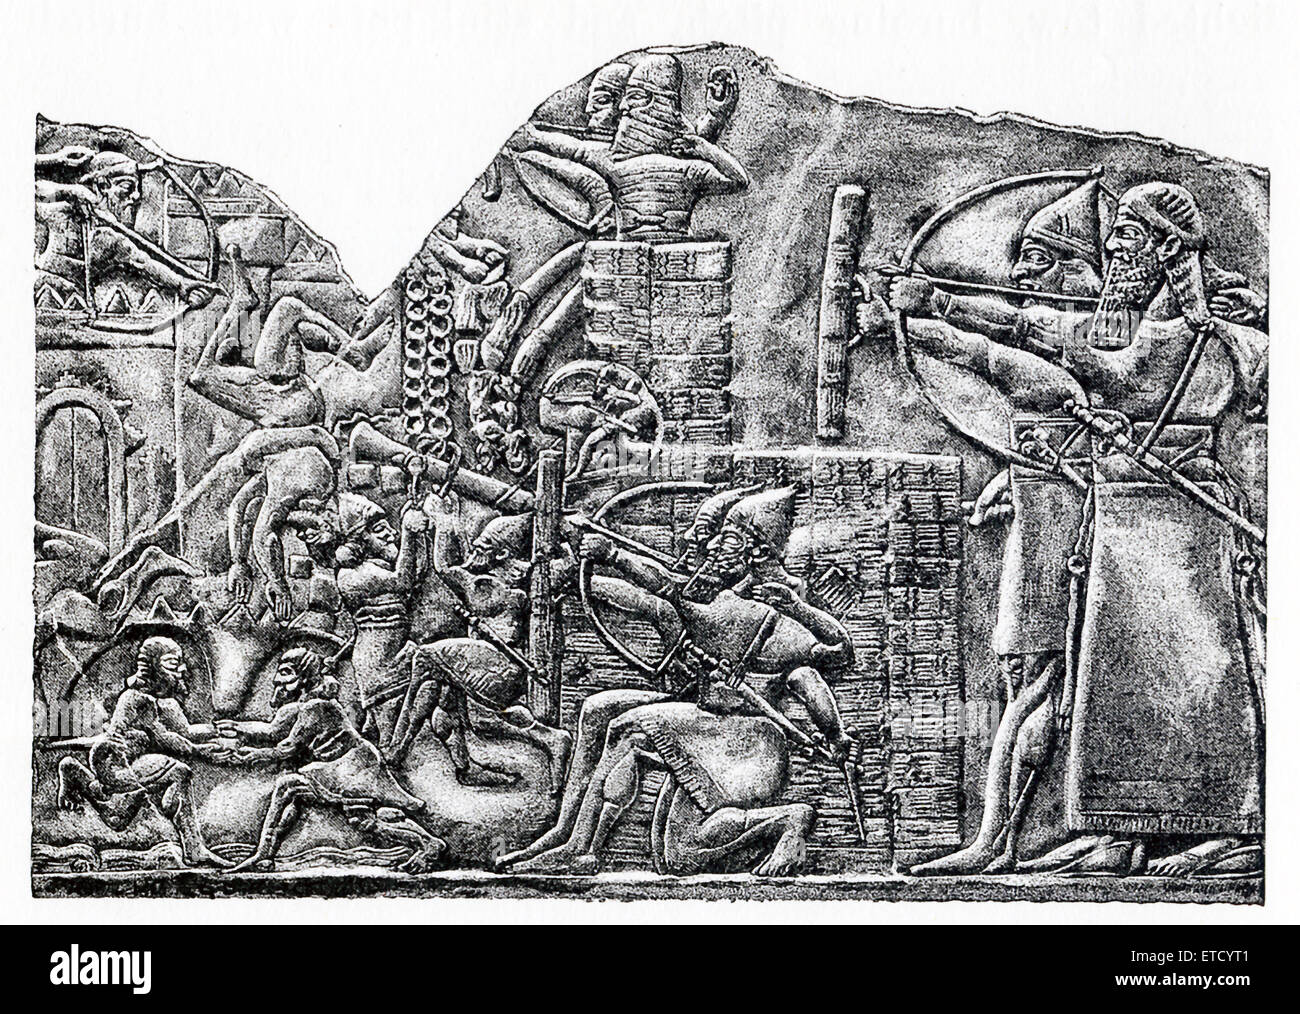 This drawing is by Henri Faucher-Gudin and accompanied the 1916 book series 'History of Egypt' by French Egyptologist Gaston Maspero. The drawing is based on a bas-relief brought from Nimrud that is now in British Museum.It shows an Assyrian turreted battering-ram attacking walls of a town. Men in the turret are archers aiming their arrows at the town. Behind them are more archers. The townspeople have built their defensive walls and archers are trying to destroy or cripple the battering ram. The Assyrian king Ashurnasirpal III (883-859 B.C.) had his palace at Nimrud (ancient Kalhu) in present Stock Photo